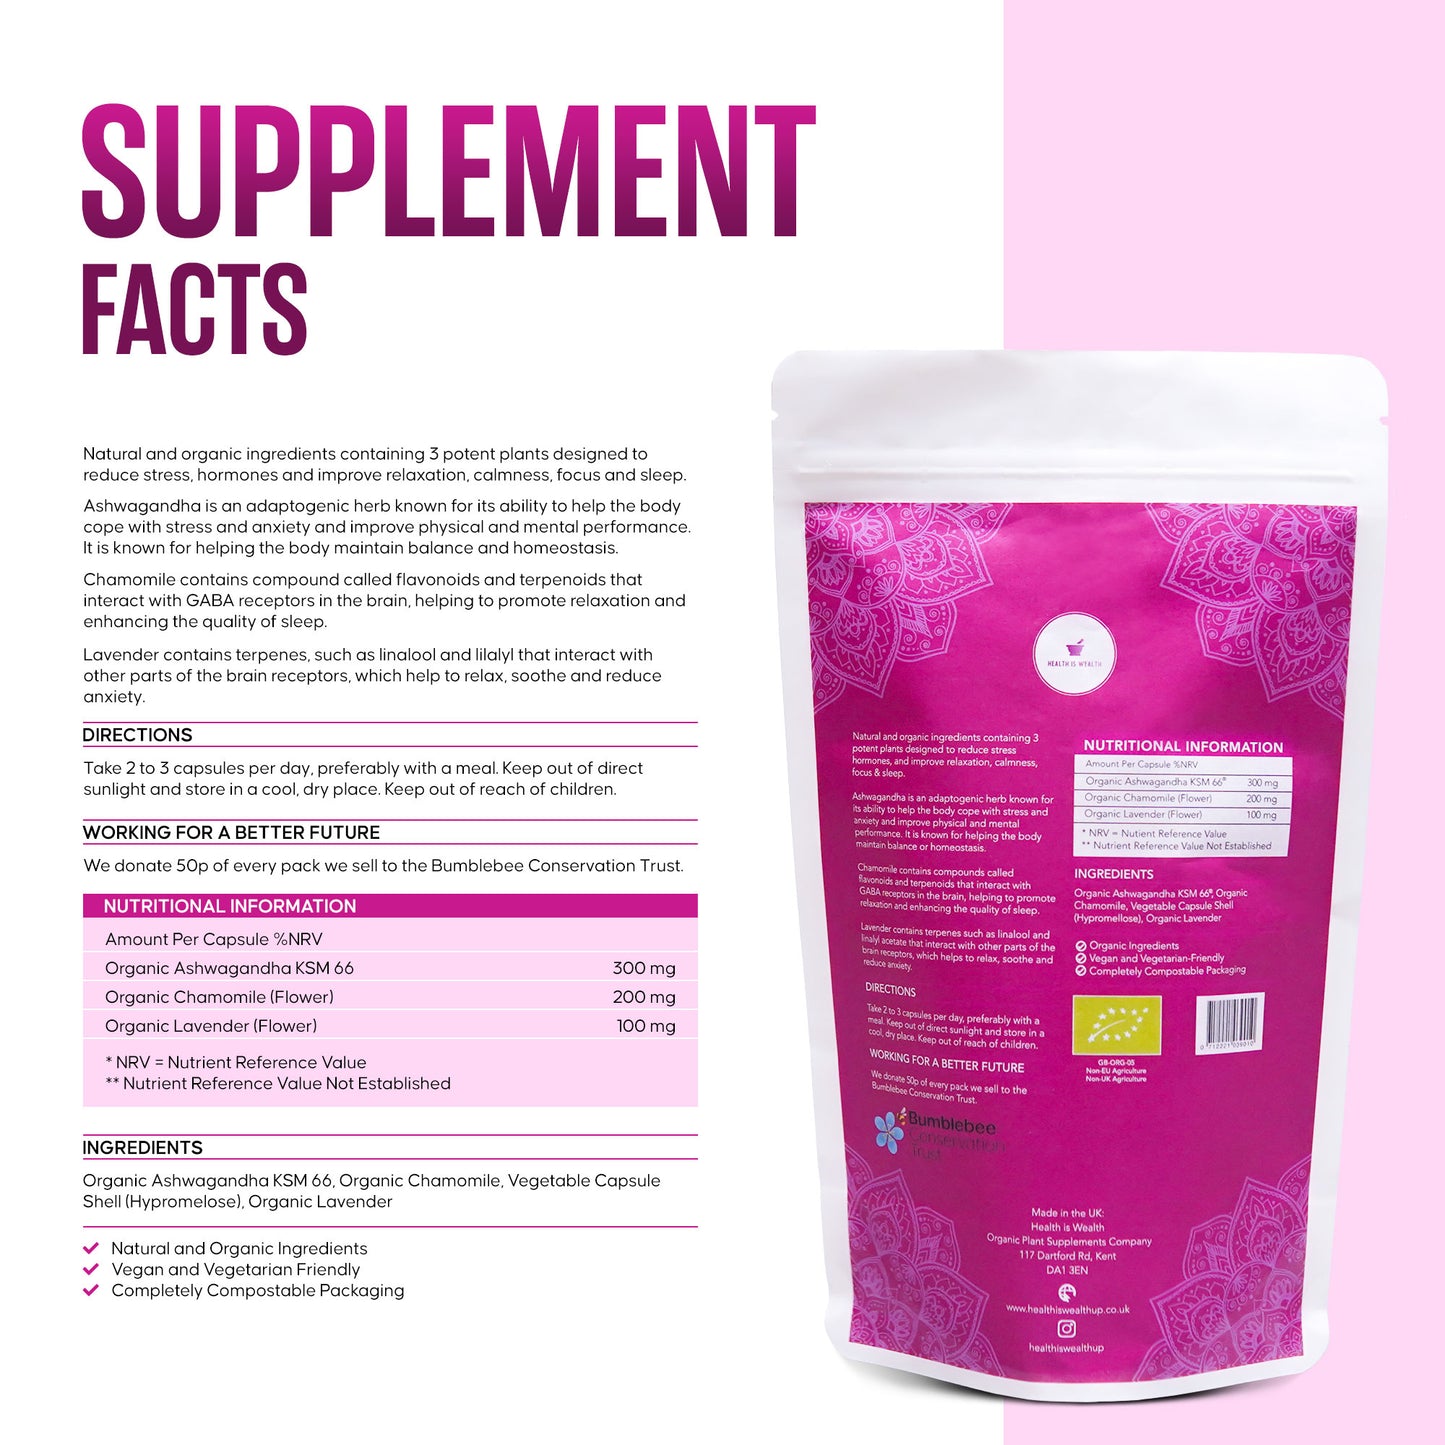  The image is a pink product information panel for "GOOD VIBES ORGANIC" supplement by Health is Wealth. It highlights the supplement facts, including natural and organic ingredients like KSM-66 Ashwagandha, Chamomile, and Lavender, which are potent plants designed to reduce stress, harmonize hormones, and promote relaxation and sleep. The label also includes nutritional information, directions for use, and a commitment to donating a portion of proceeds to the Bumblebee Conservation Trust.